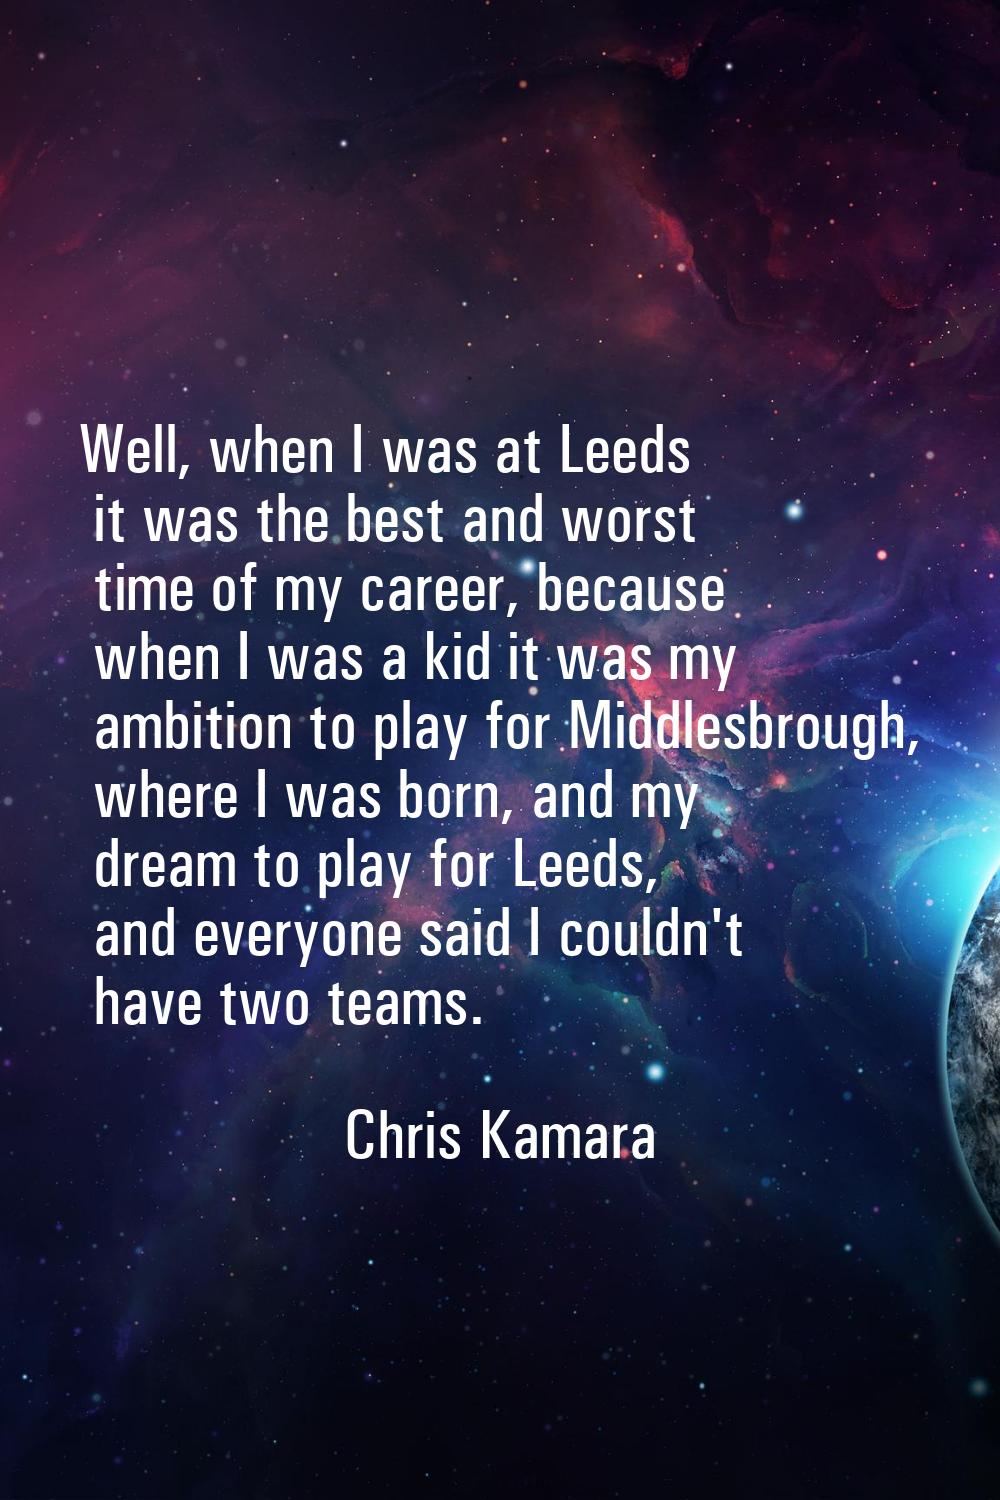 Well, when I was at Leeds it was the best and worst time of my career, because when I was a kid it 